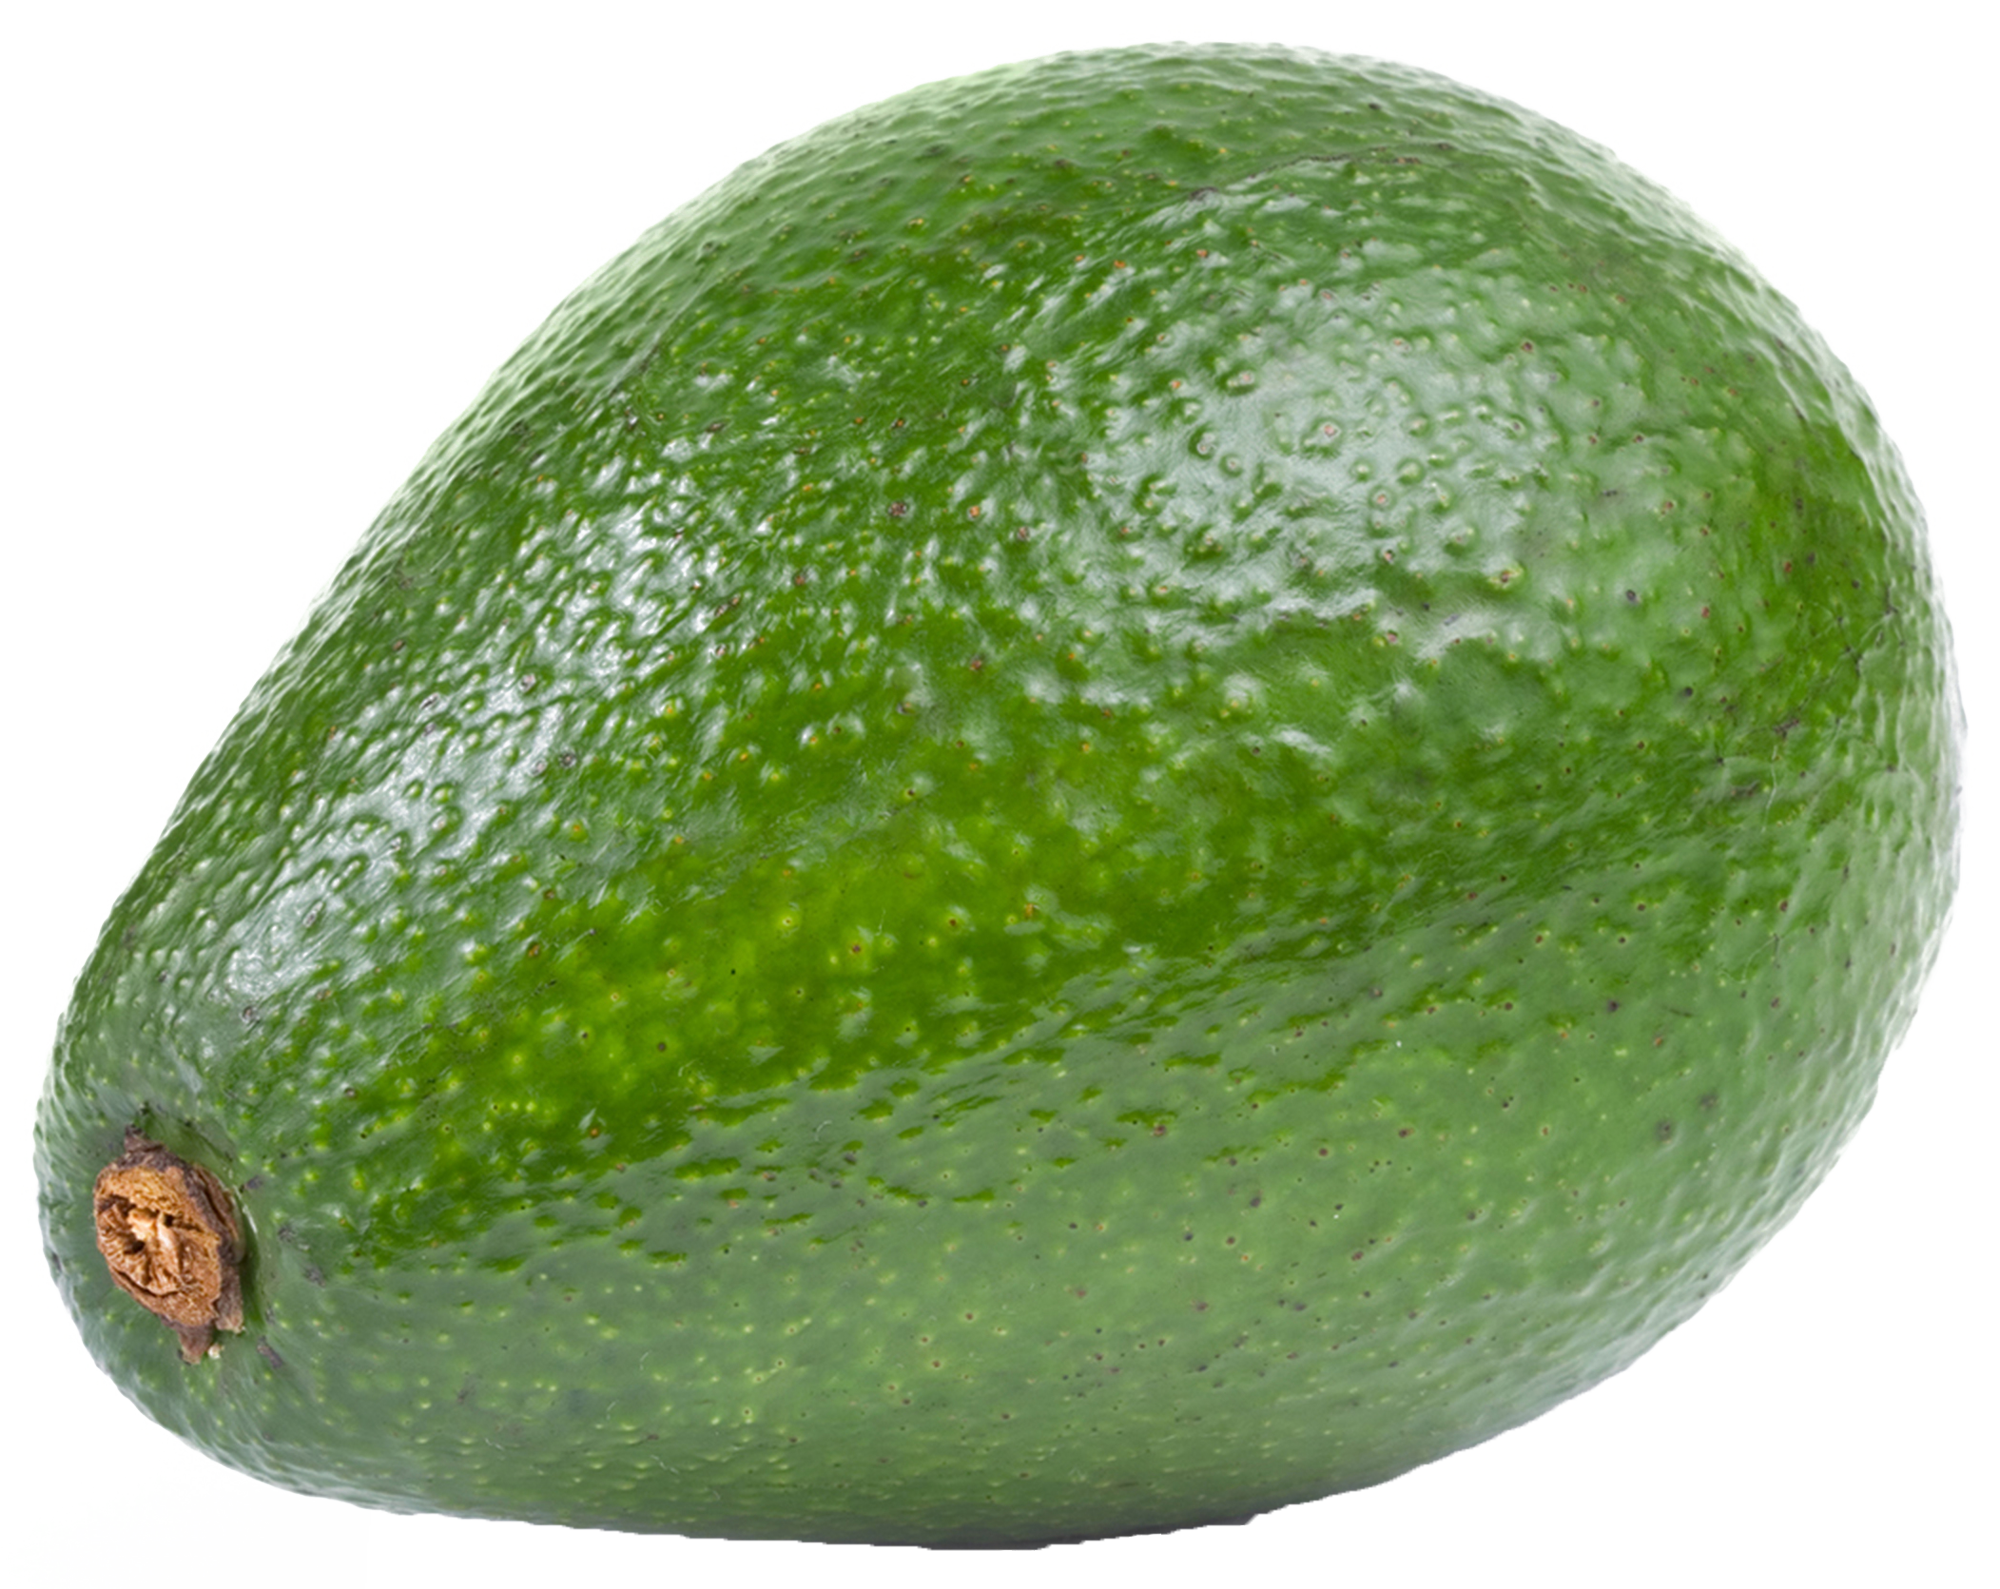 Avocados are a real super foo